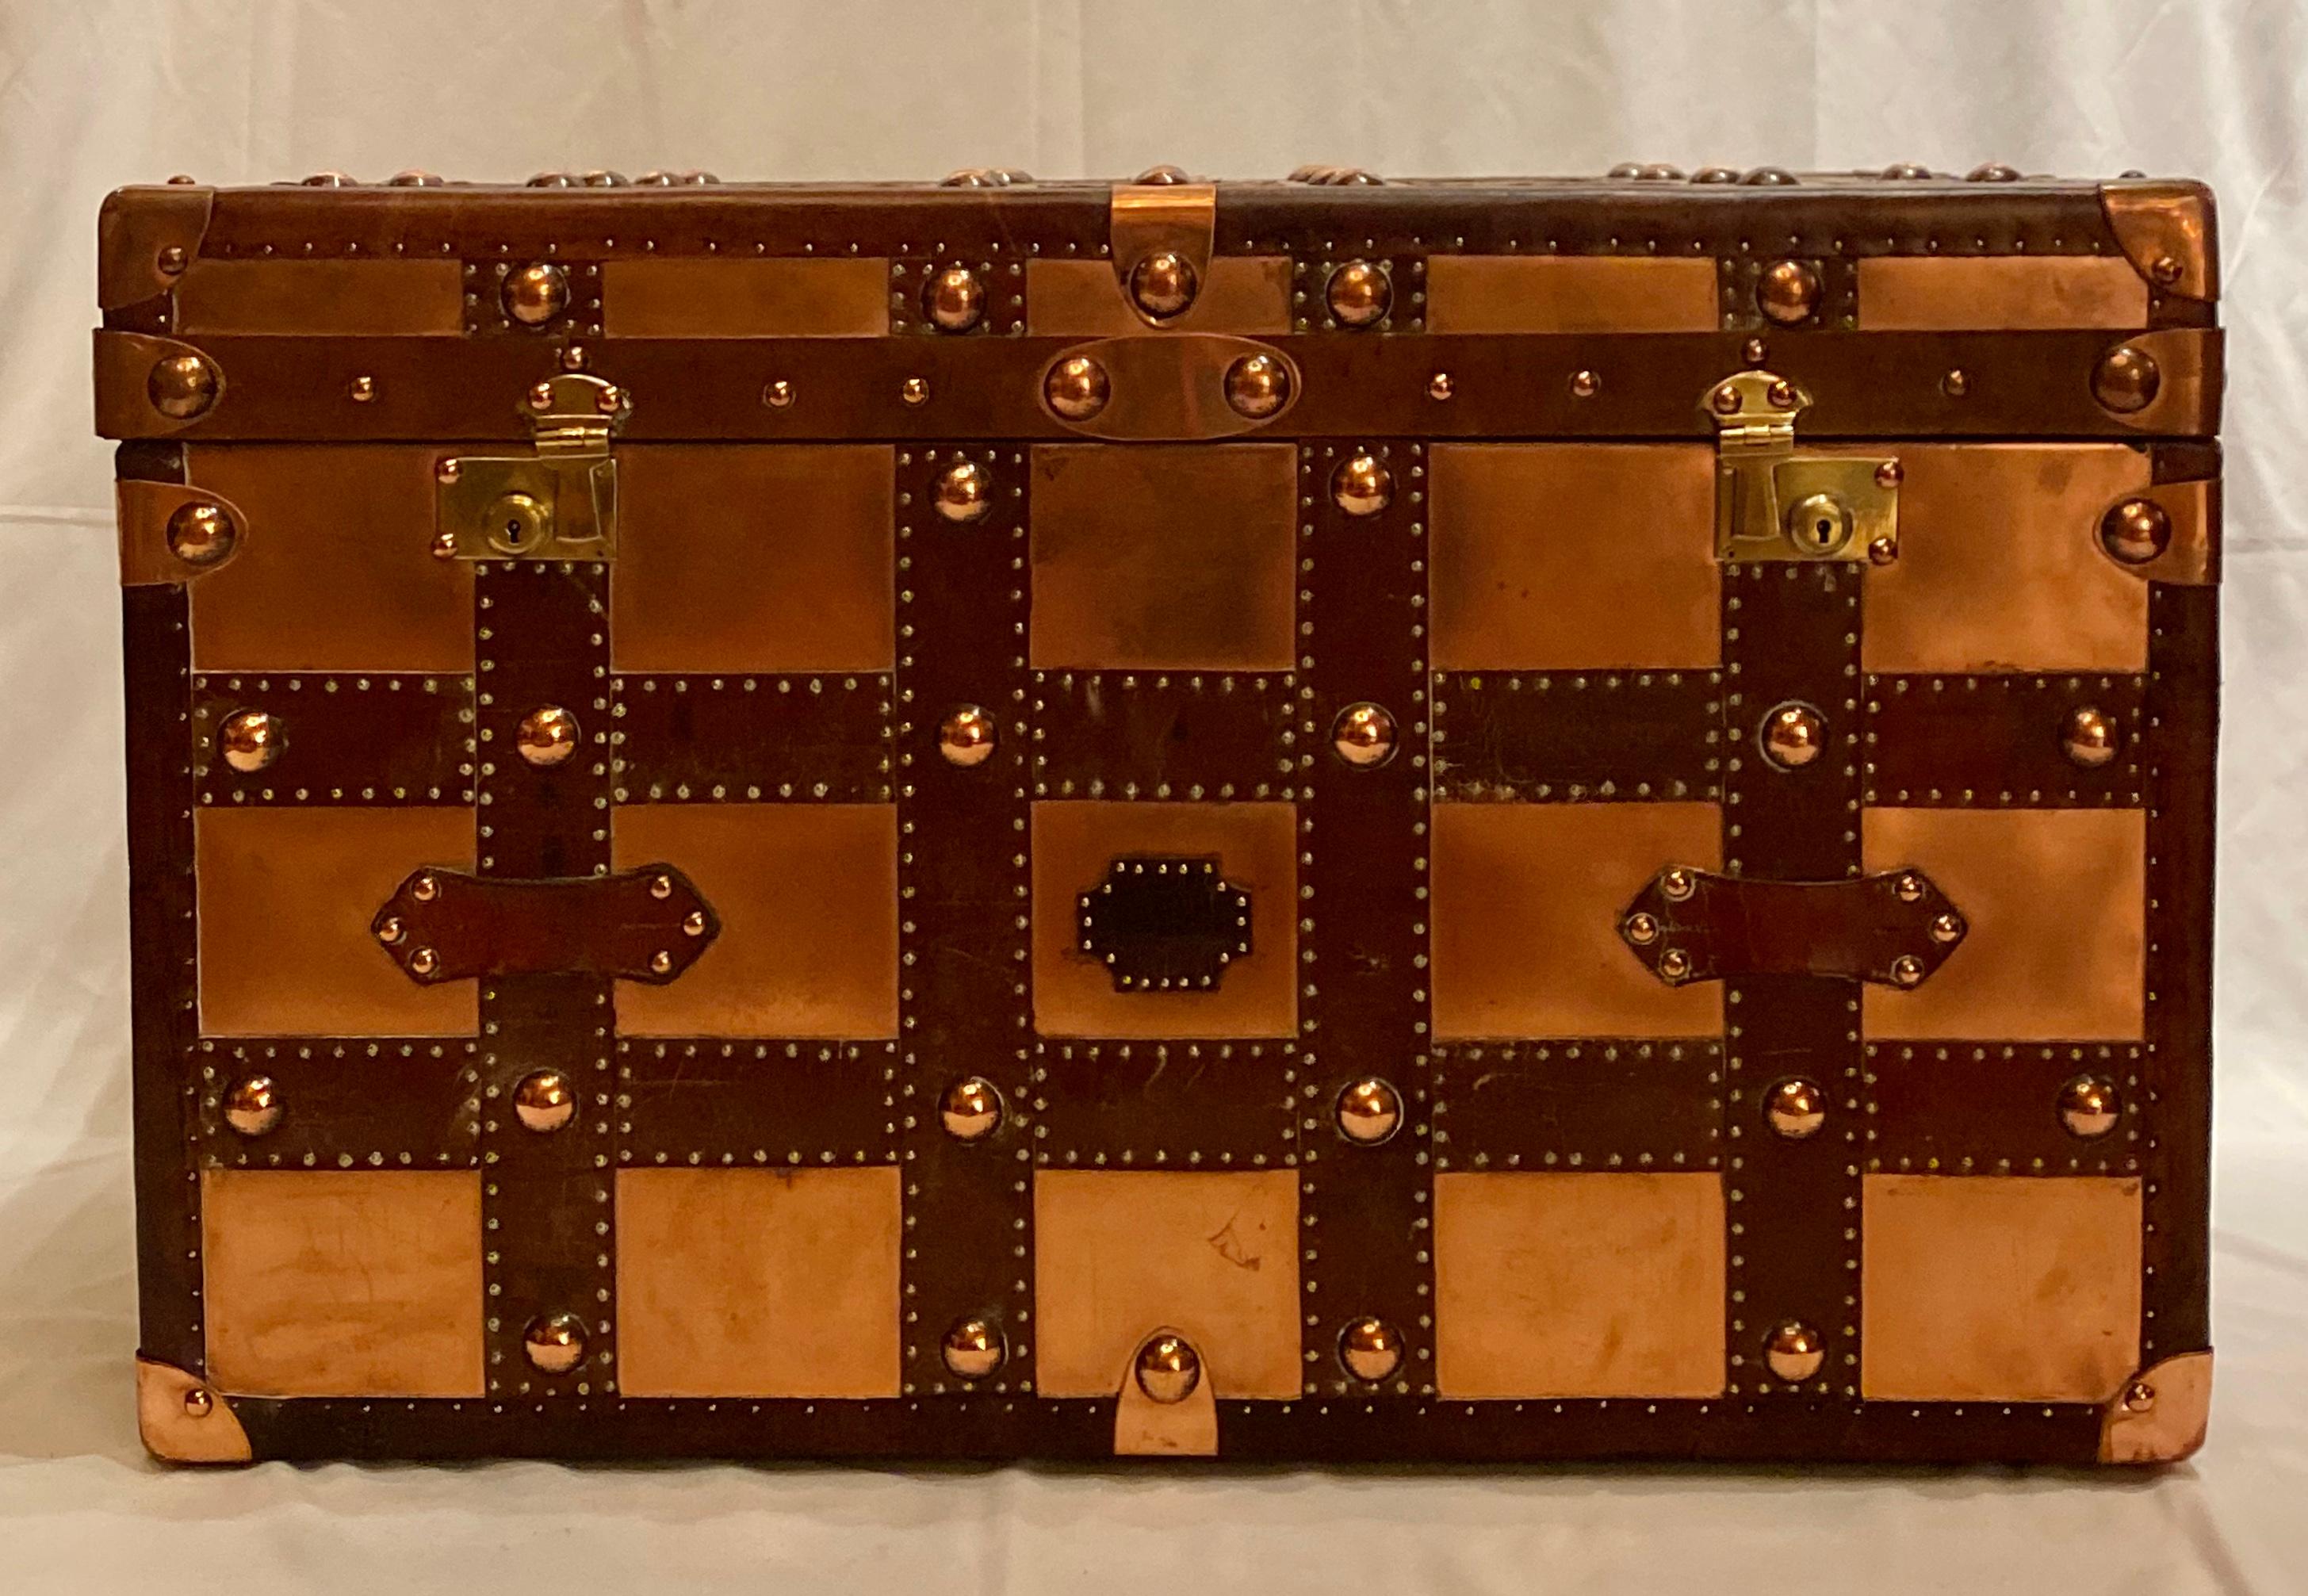 Antique British Military Officer's trunk, copper and leather, circa 1890.
TRNK005.